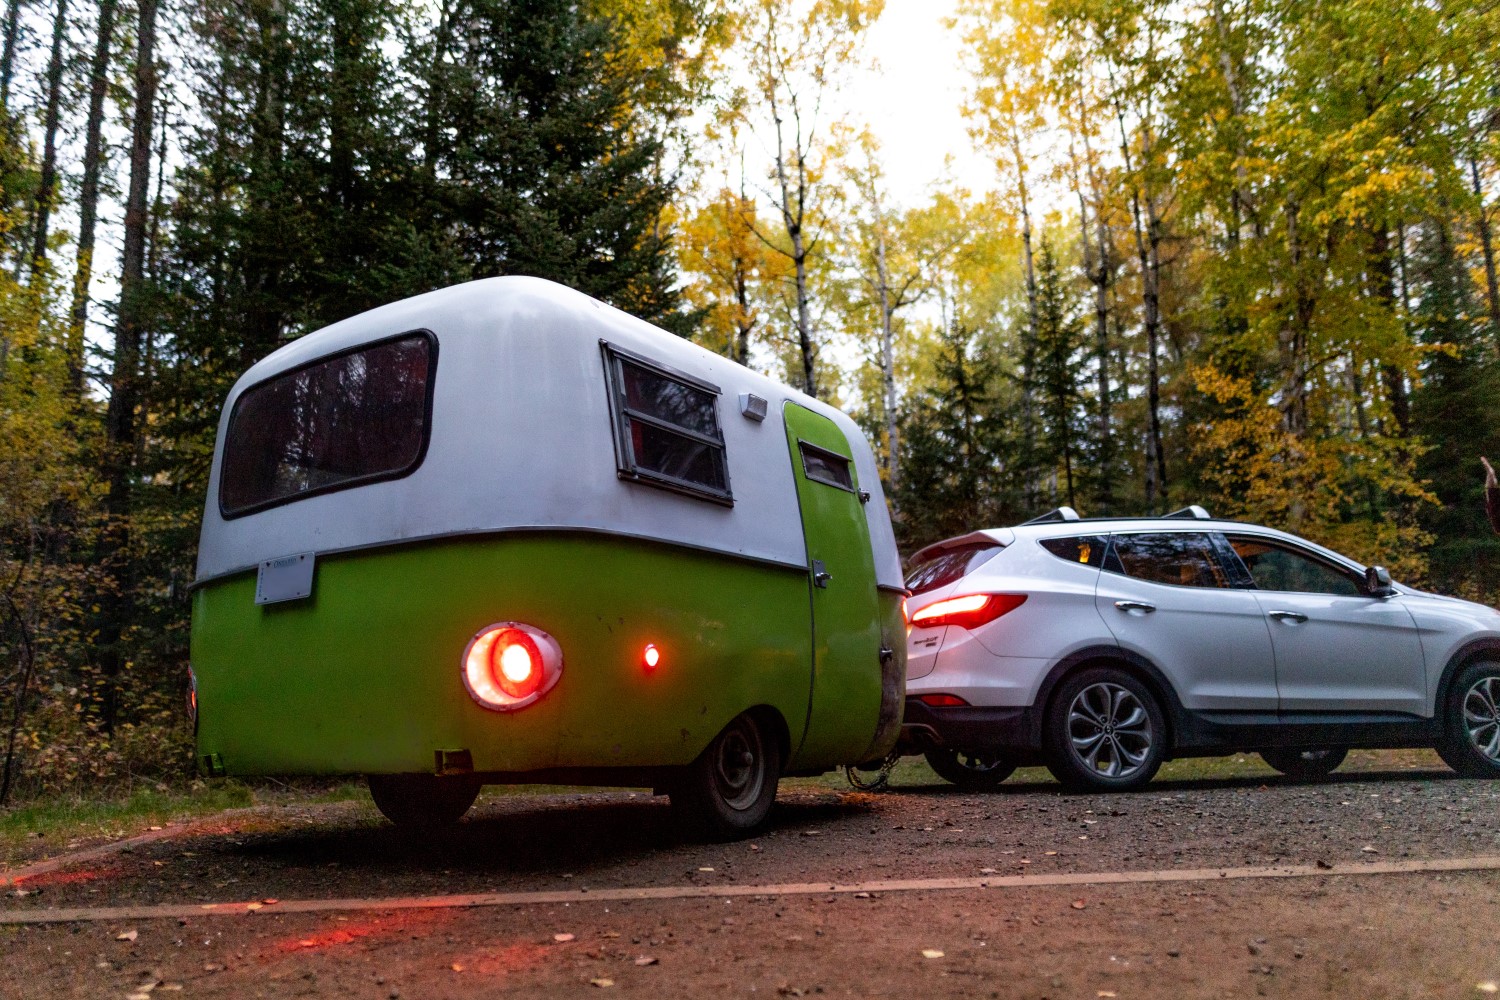 A small green and white trailer attached to a silver SUV in a campground parking lot.